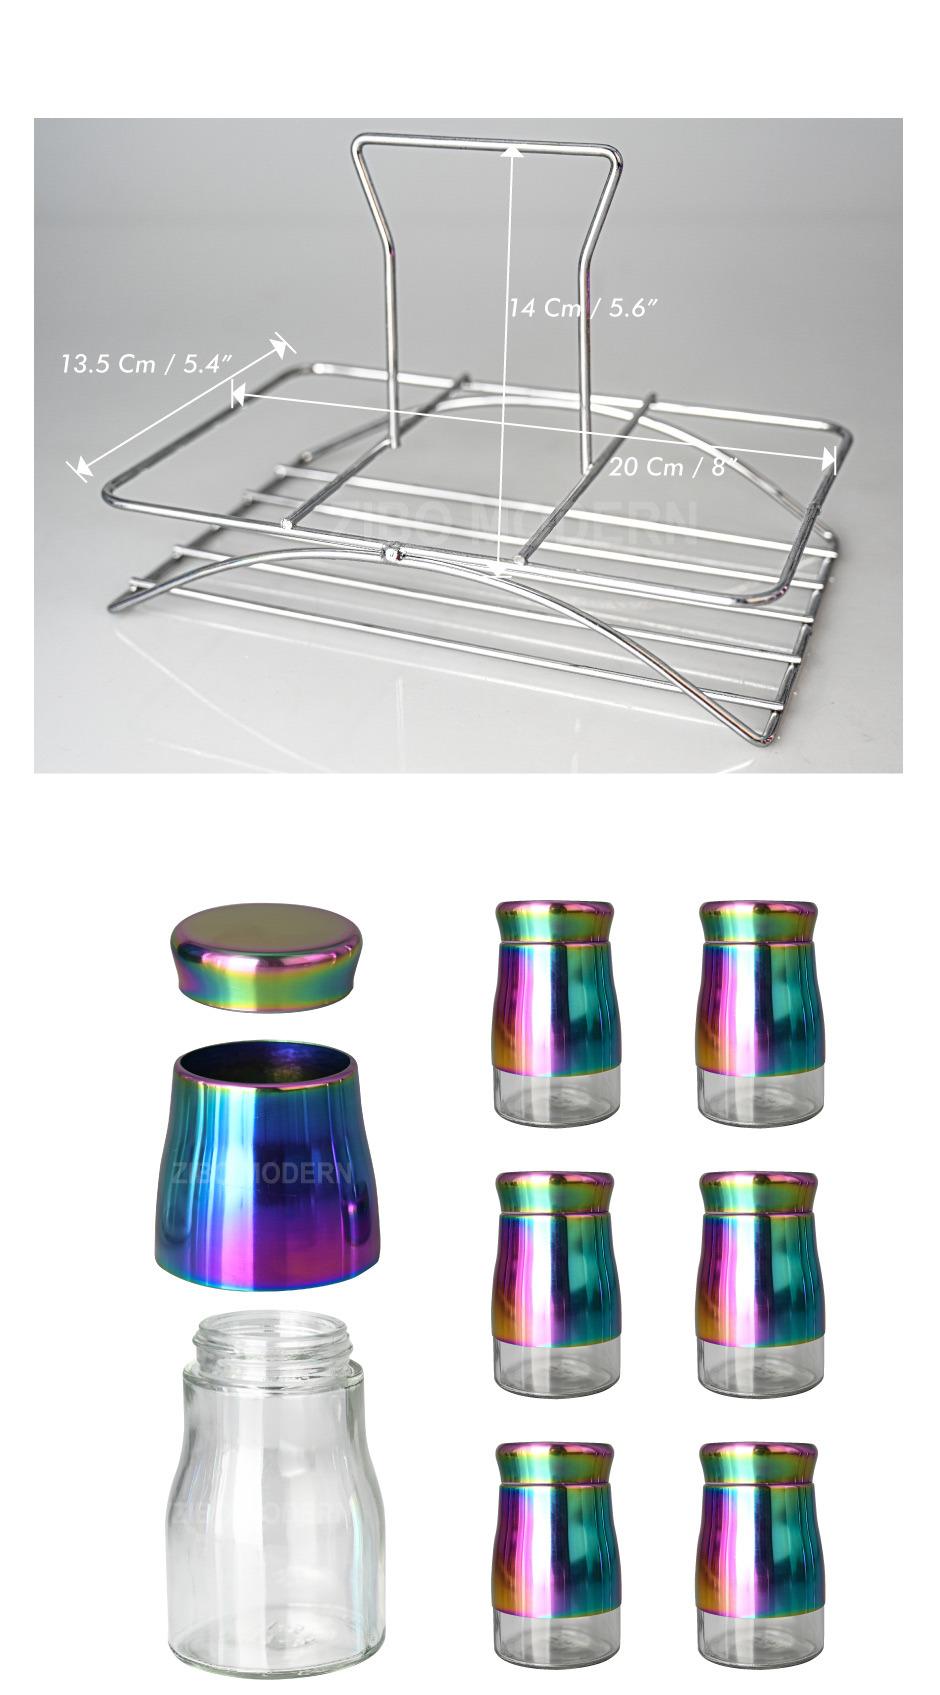 Rainbow Color Glass and Stainless-Steel Spice Storage / Jar Rack Countertop Herb Organization for Home & Kitchen Set of 6